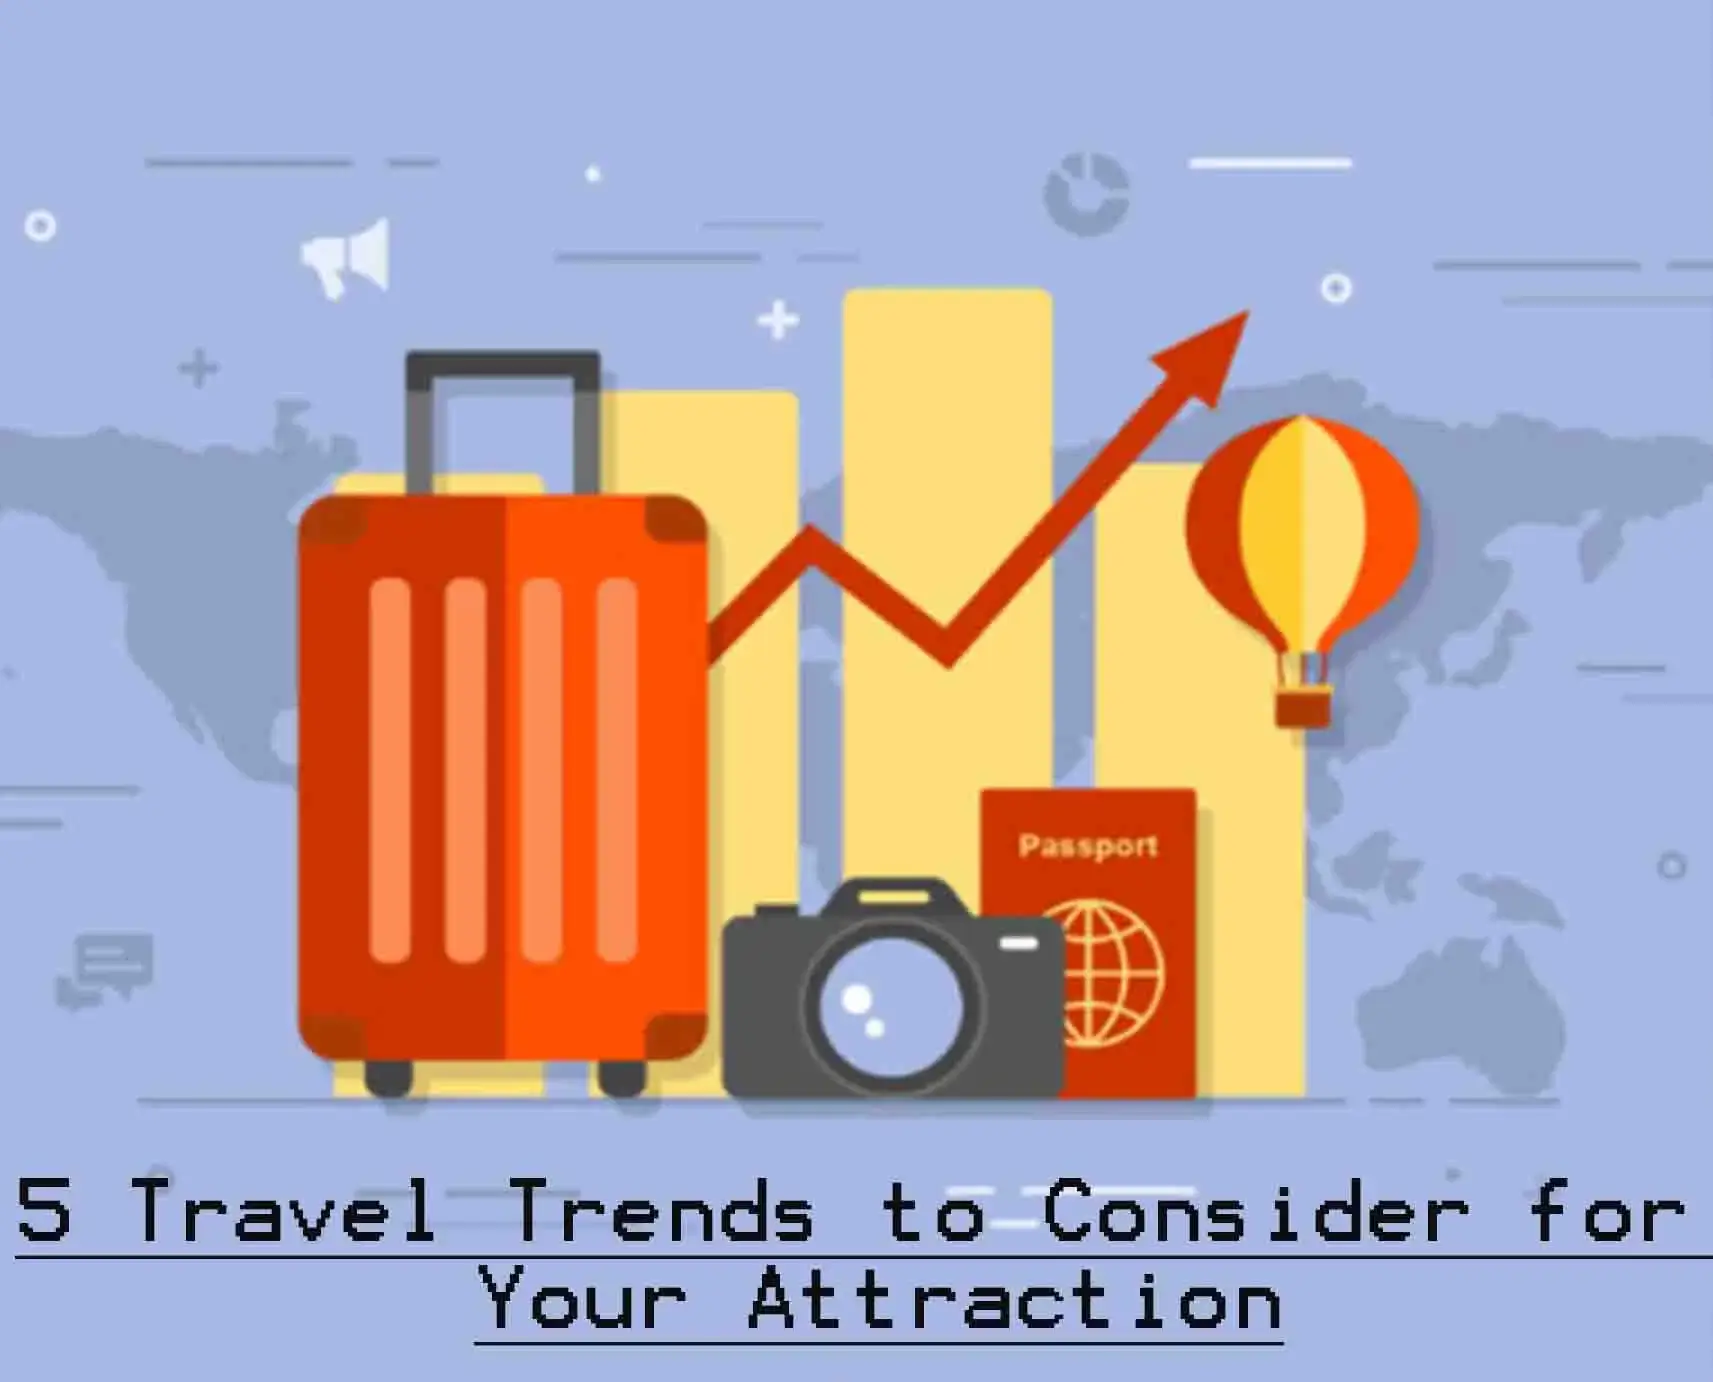 5 Travel Trends to Consider for Your Attraction